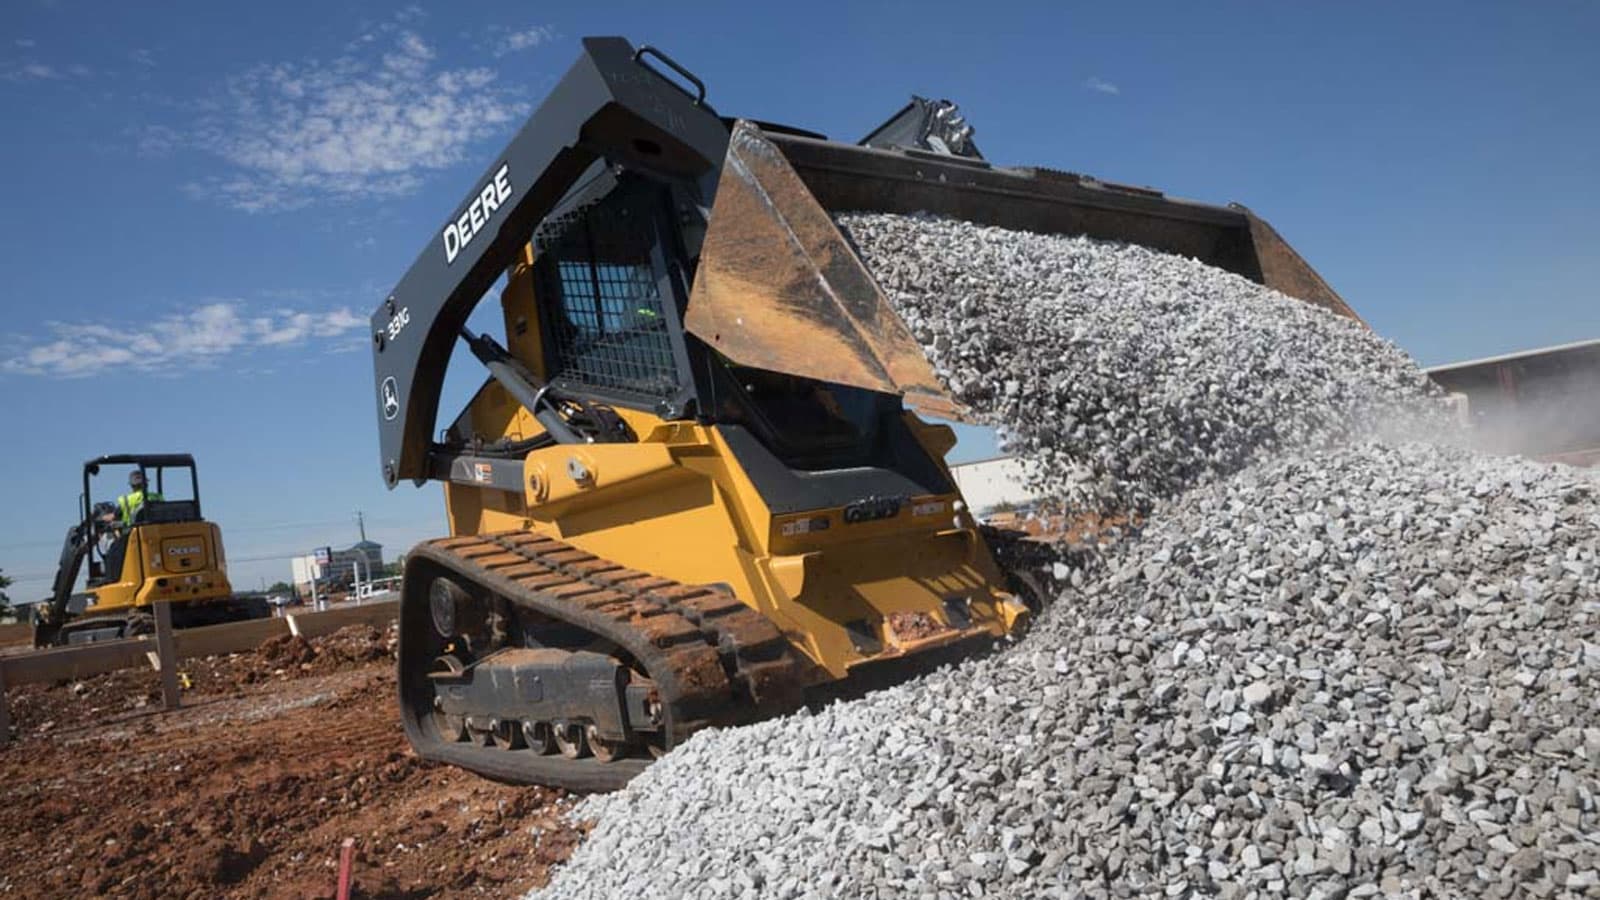 A 331G scoops gravel in the foreground on a work site in Huntsville, Alabama while a 35G works in the background.